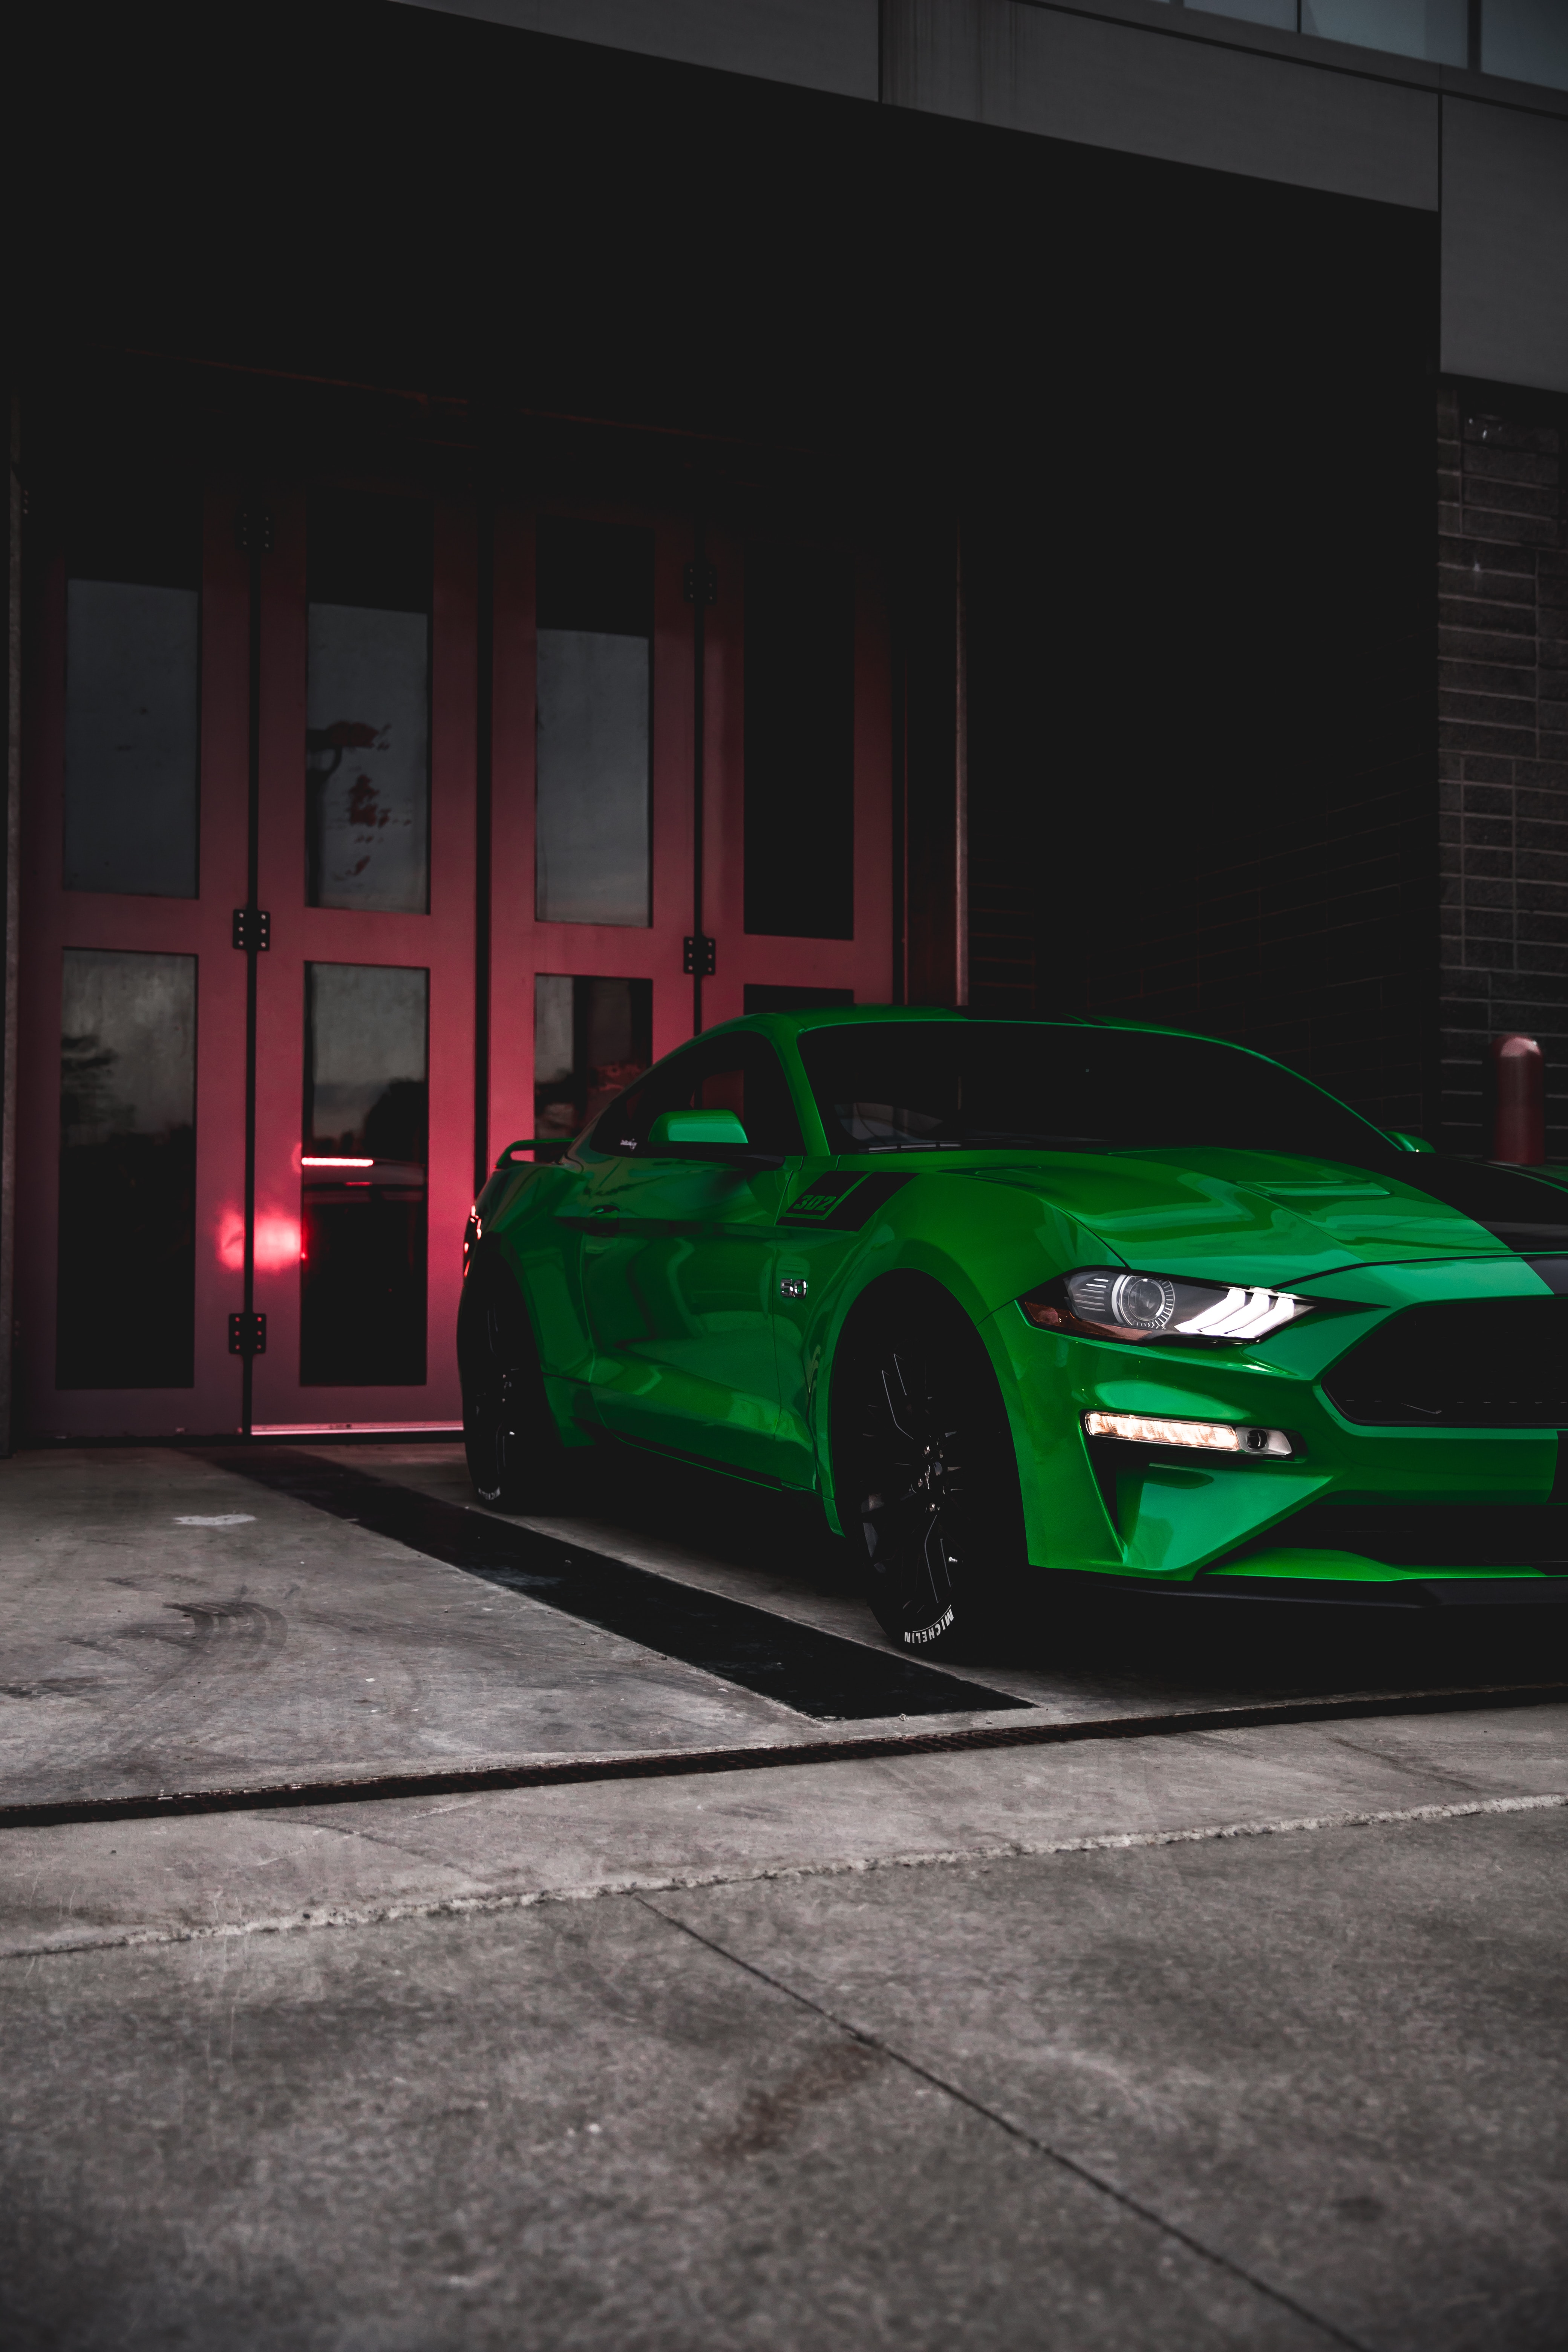 sports, car, ford, ford mustang, cars, green, machine, sports car, parking